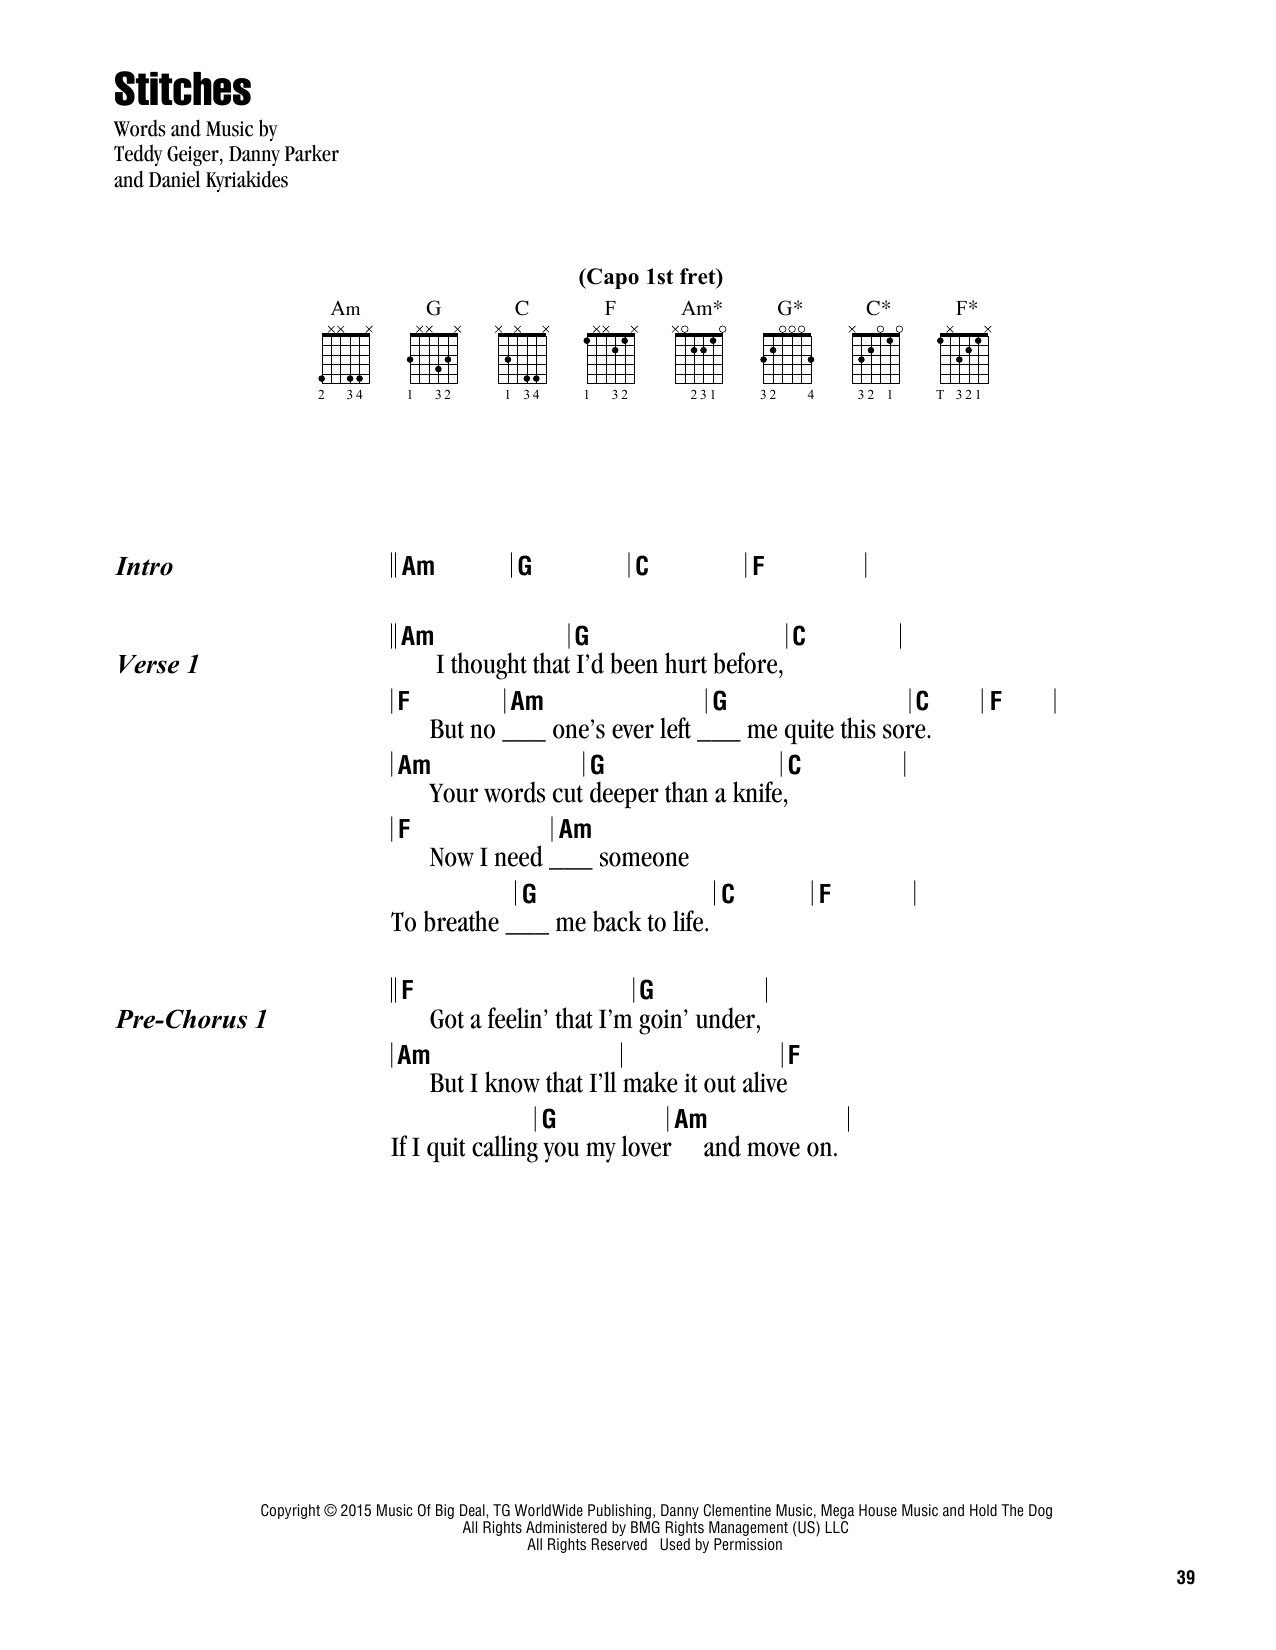 Download Shawn Mendes Stitches Sheet Music